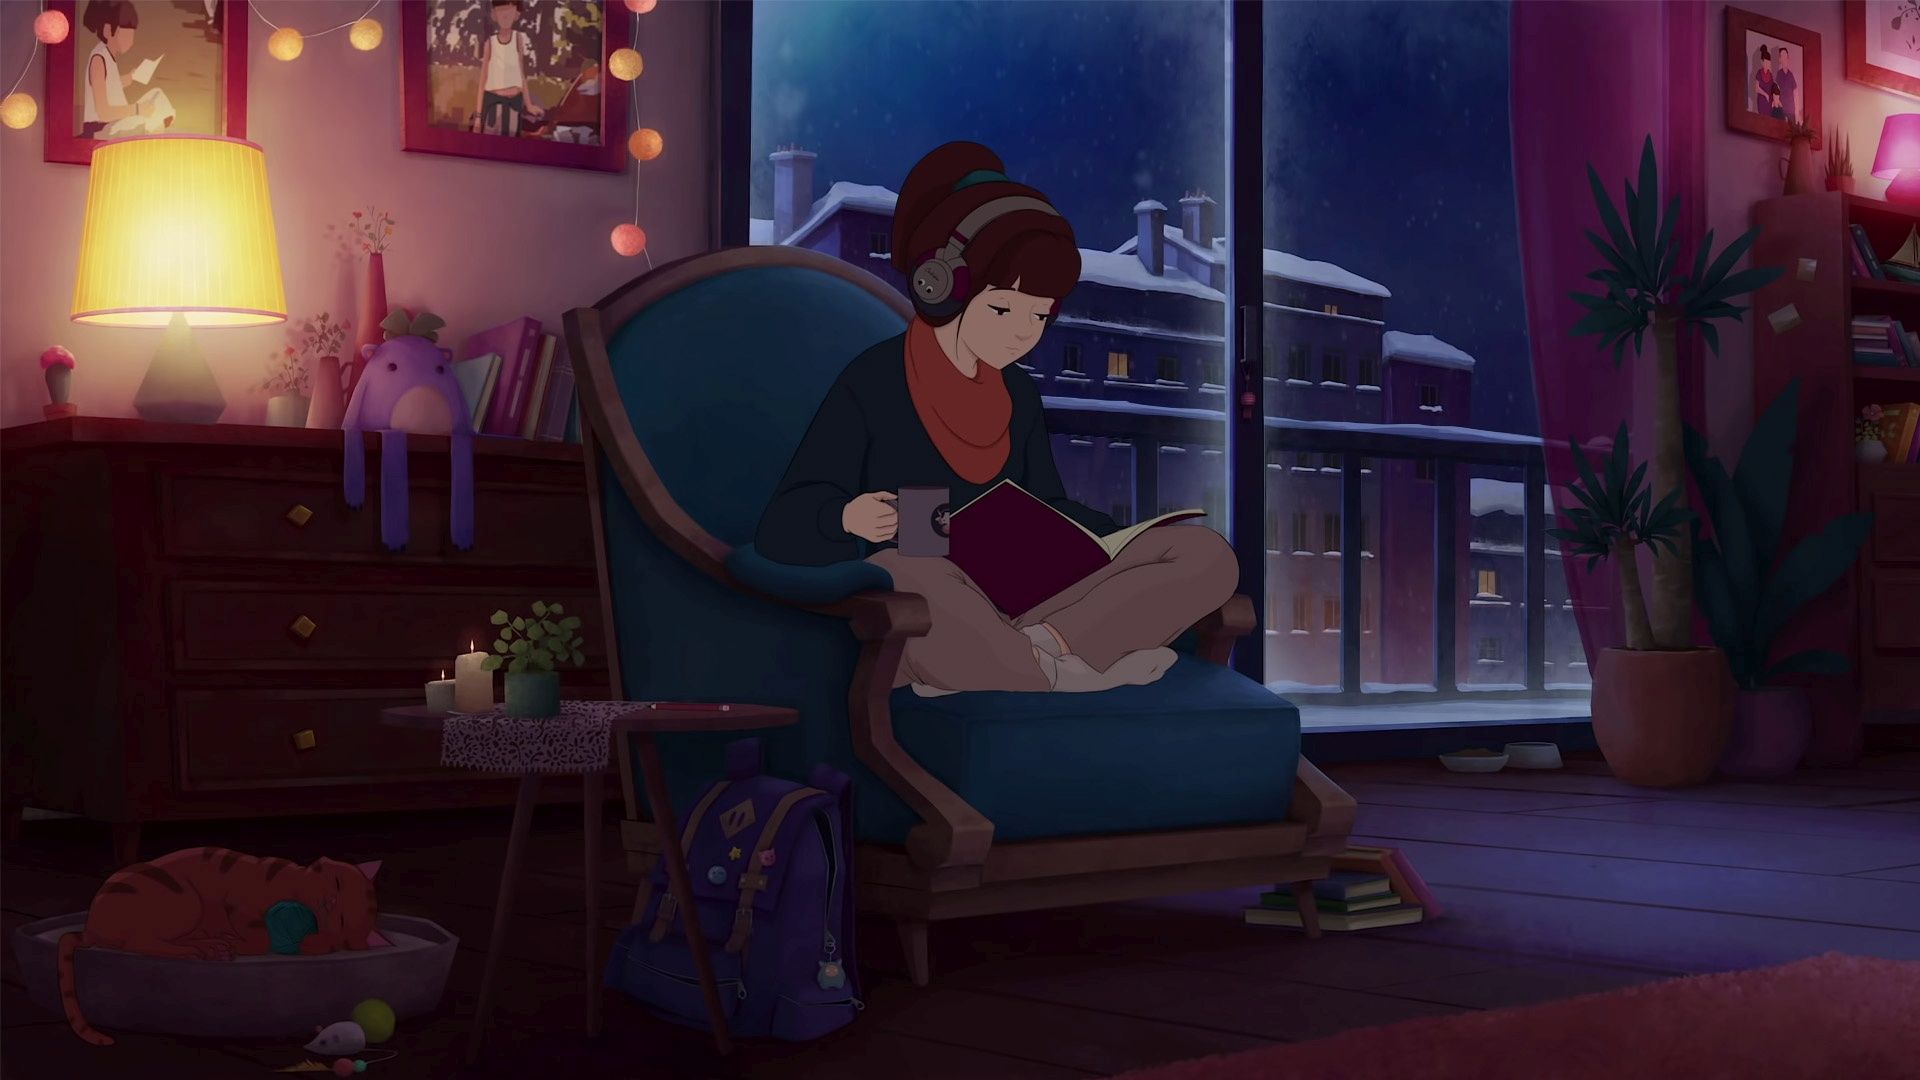 A girl sits in a chair, reading a book with headphones on. - Lo fi